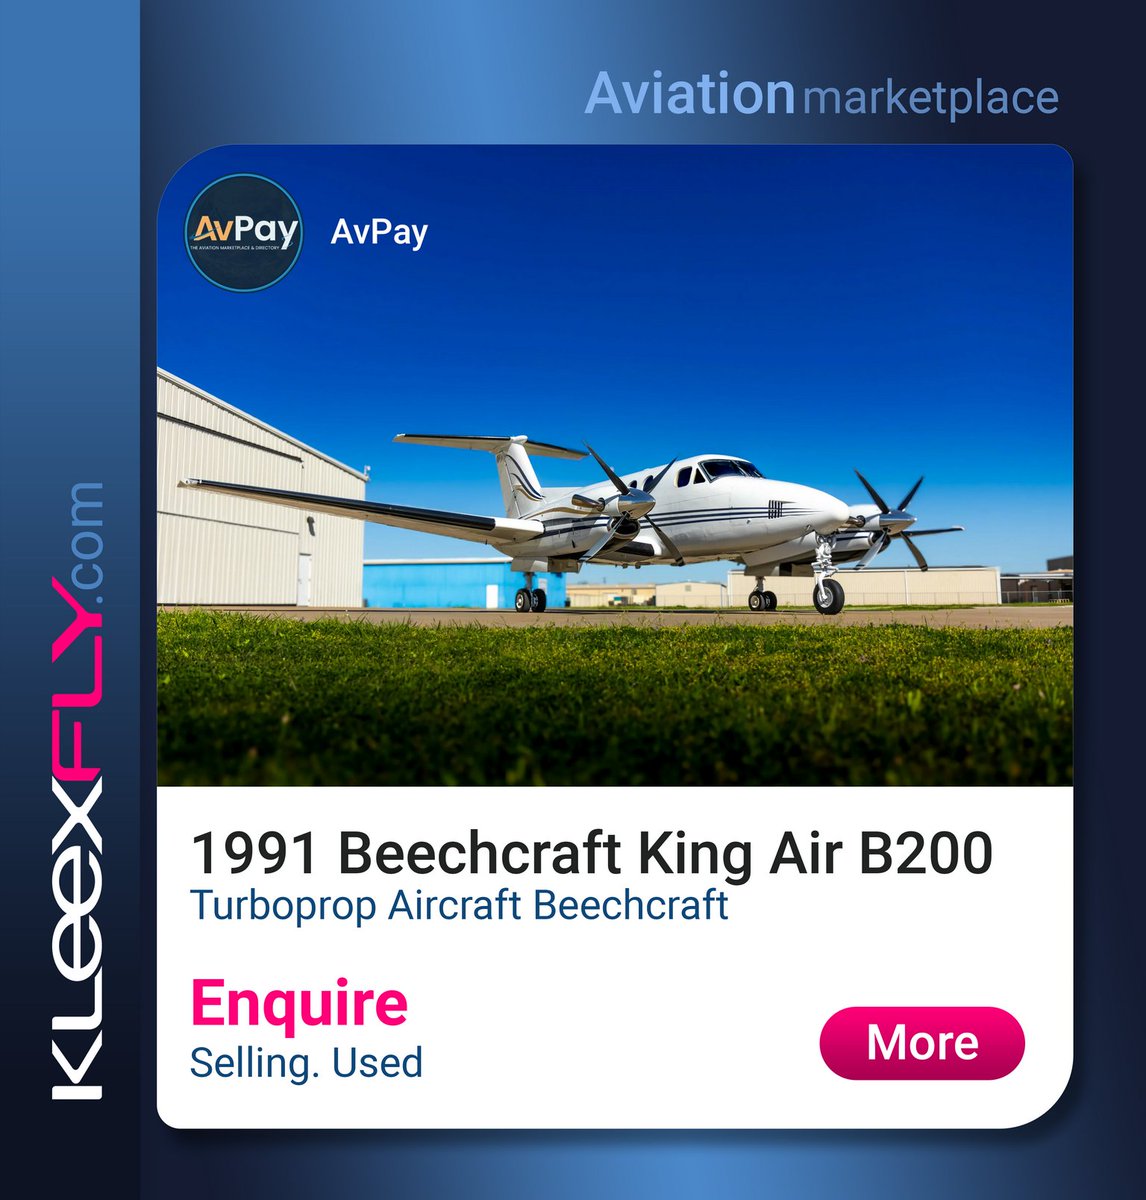 1991 Beechcraft King Air B200. For sale.
kleexfly.com/wp/ad/?ad_id=1…

#Beechcraft #KingAir #AvPay #Aircraft #Helicopters #Gliders #Schools #Jobs #Drones #Skydiving #Paragliding #Speedflying #Kiting